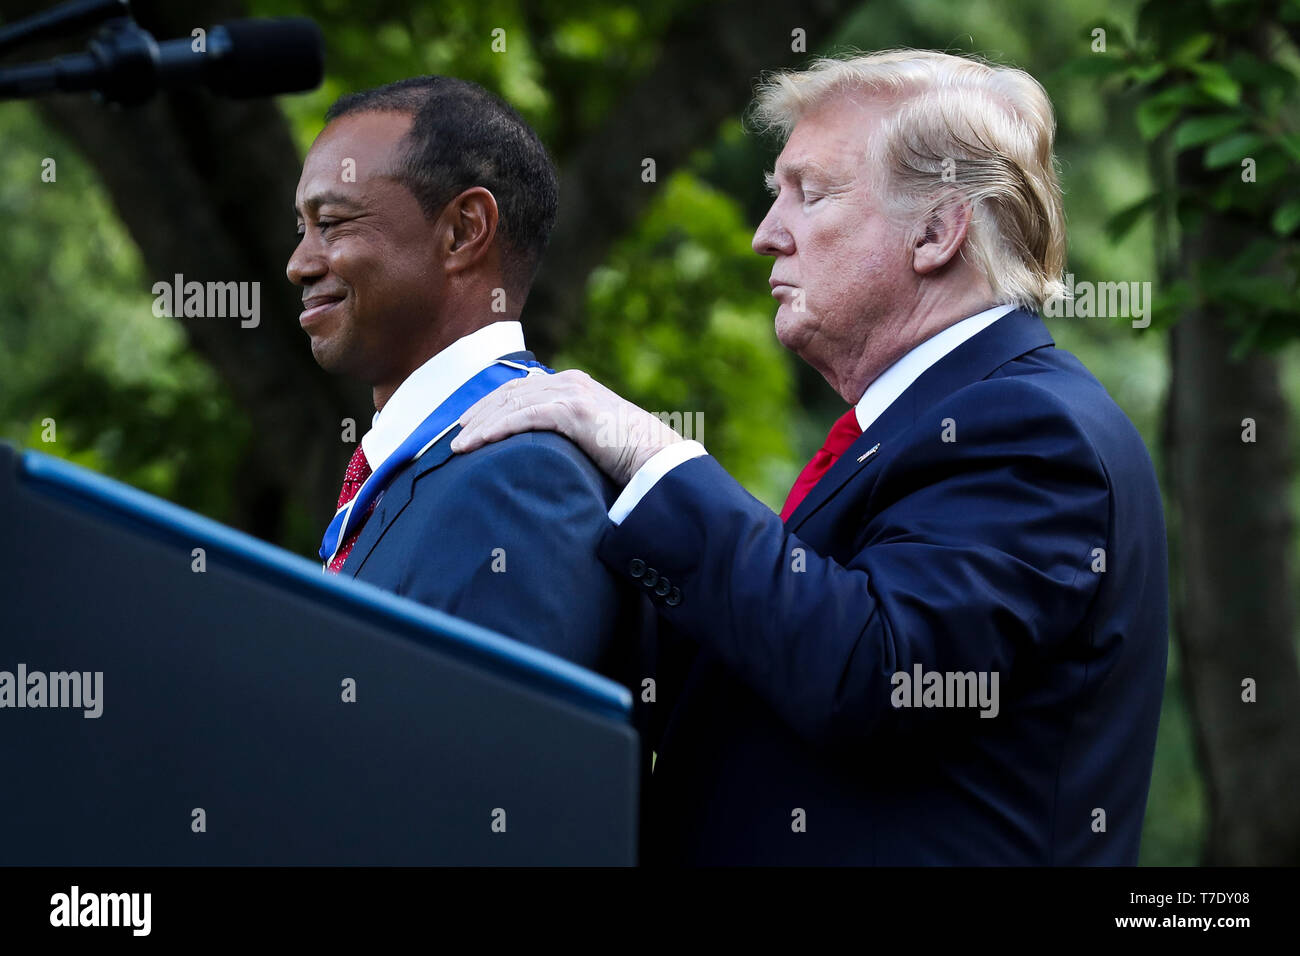 United States President Donald J. Trump presents the Presidential Medal of Freedom to Tiger Woods during a ceremony in the Rose Garden of the White House on May 6, 2019 in Washington, DC. Credit: Oliver Contreras/Pool via CNP /MediaPunch Stock Photo